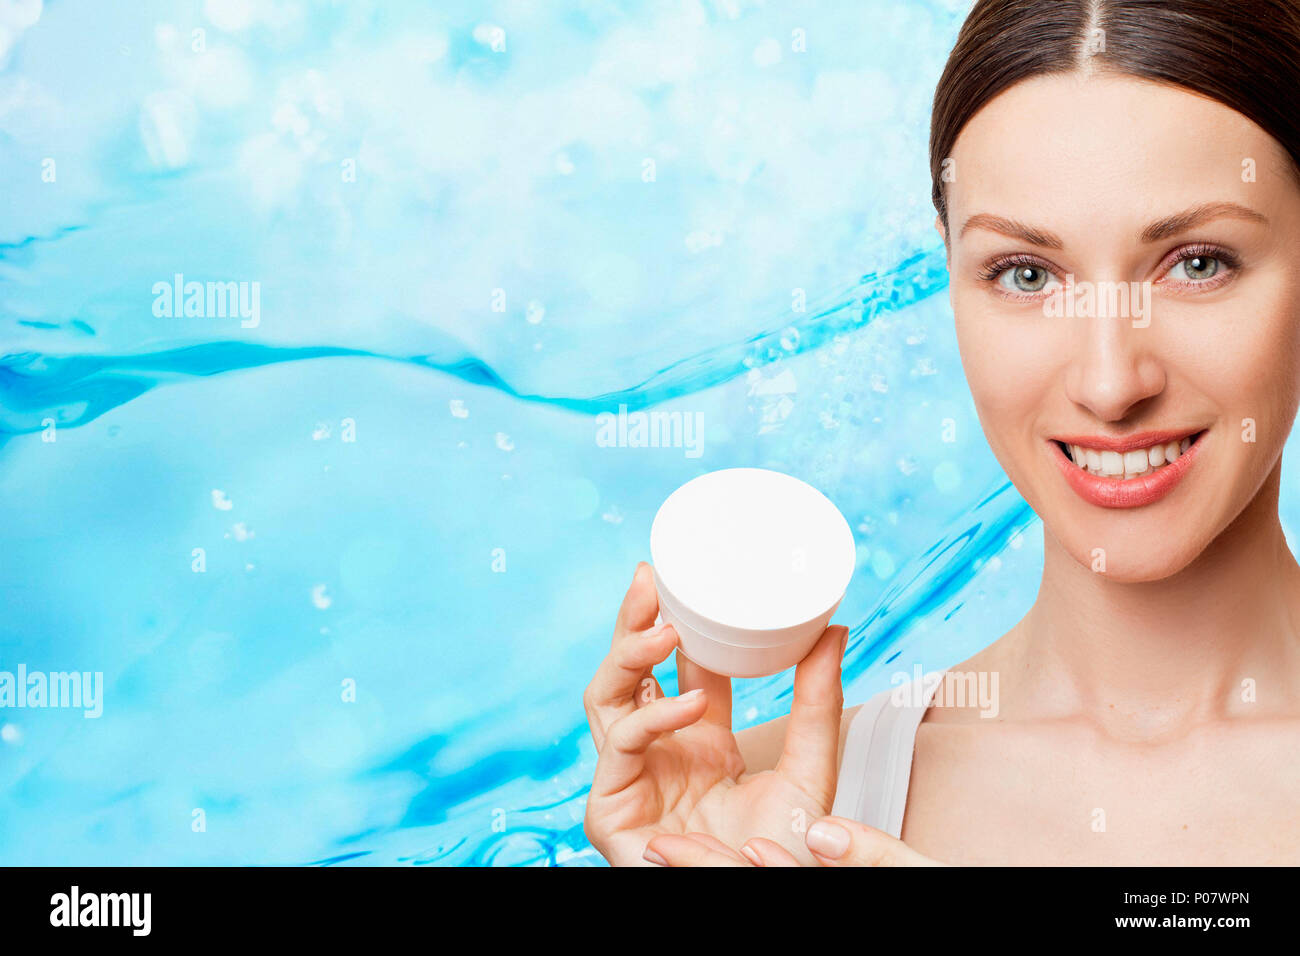 Luxury cosmetic ads,face cream, beauty, woman isolated on bokeh background. Stock Photo